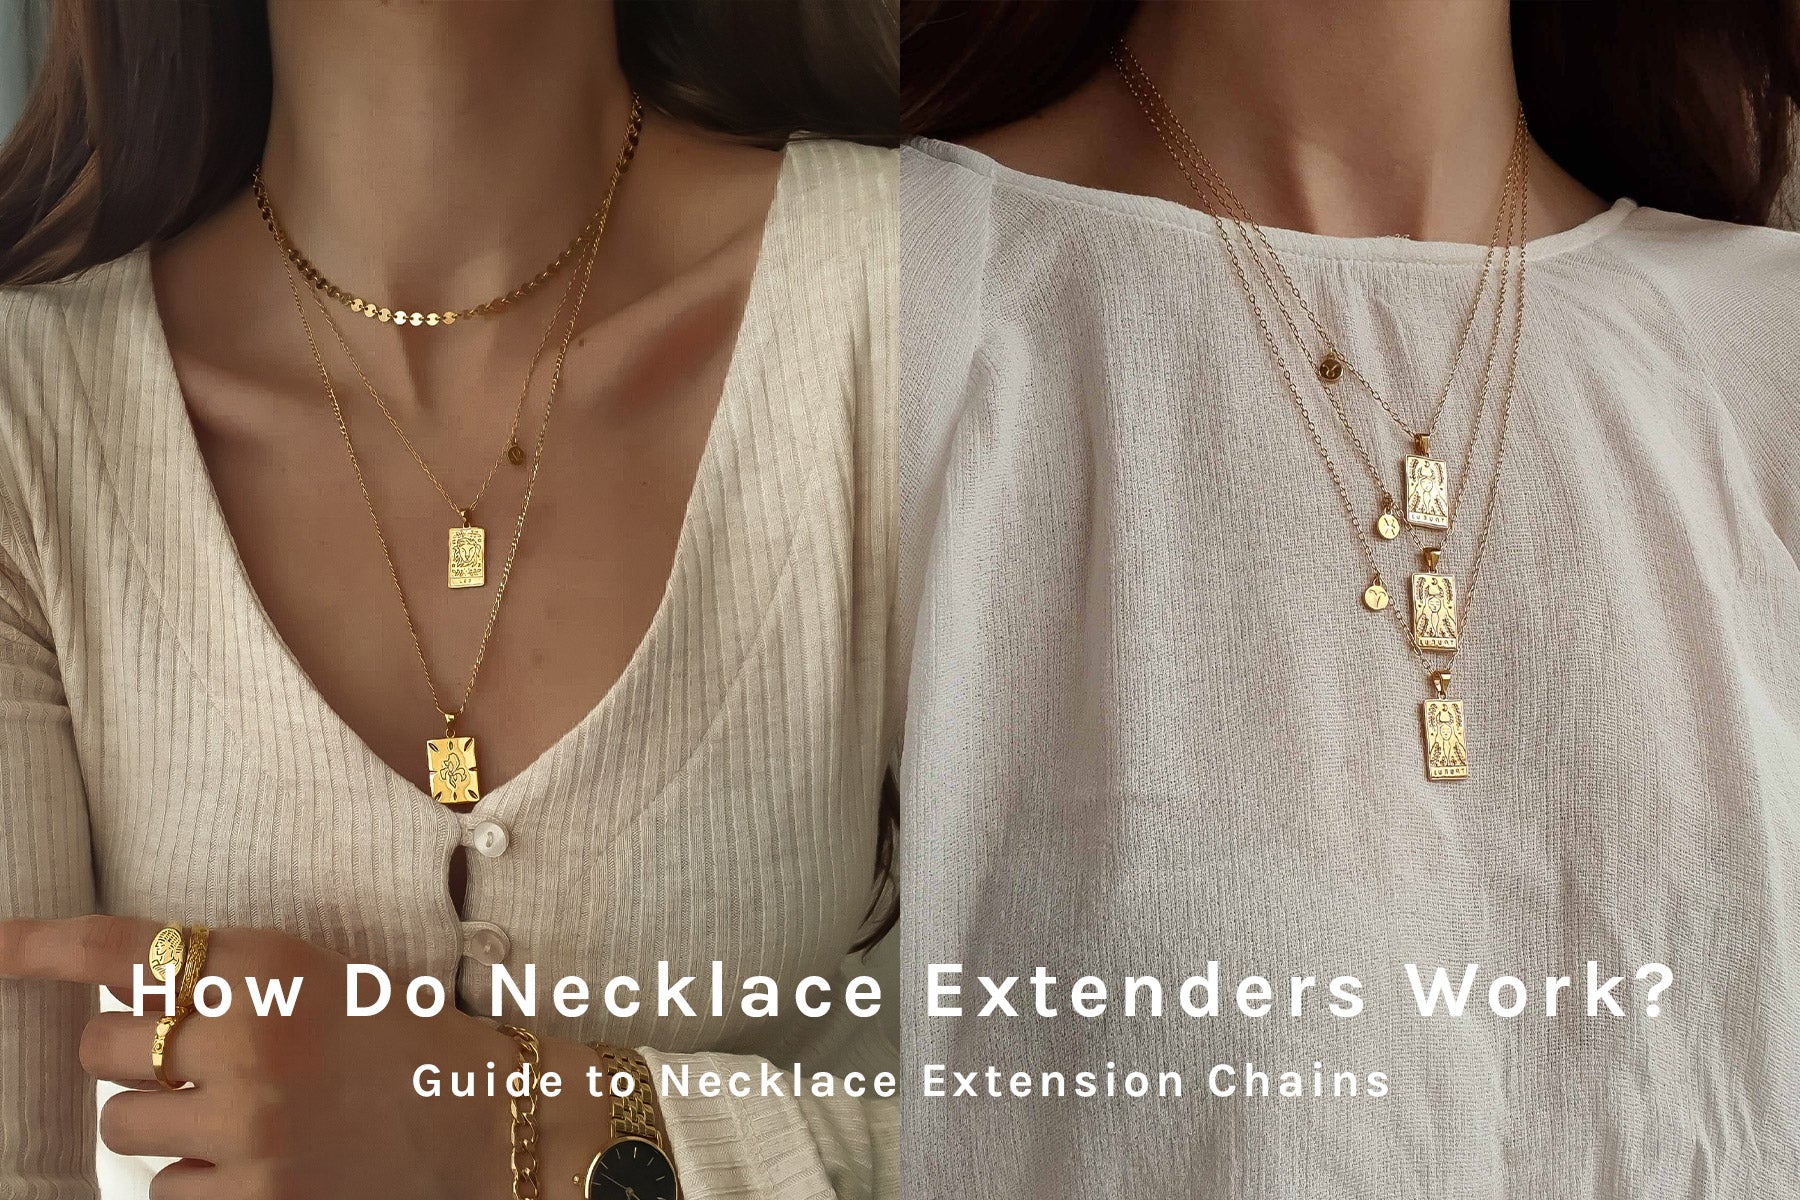 Jewelry Chain Guide